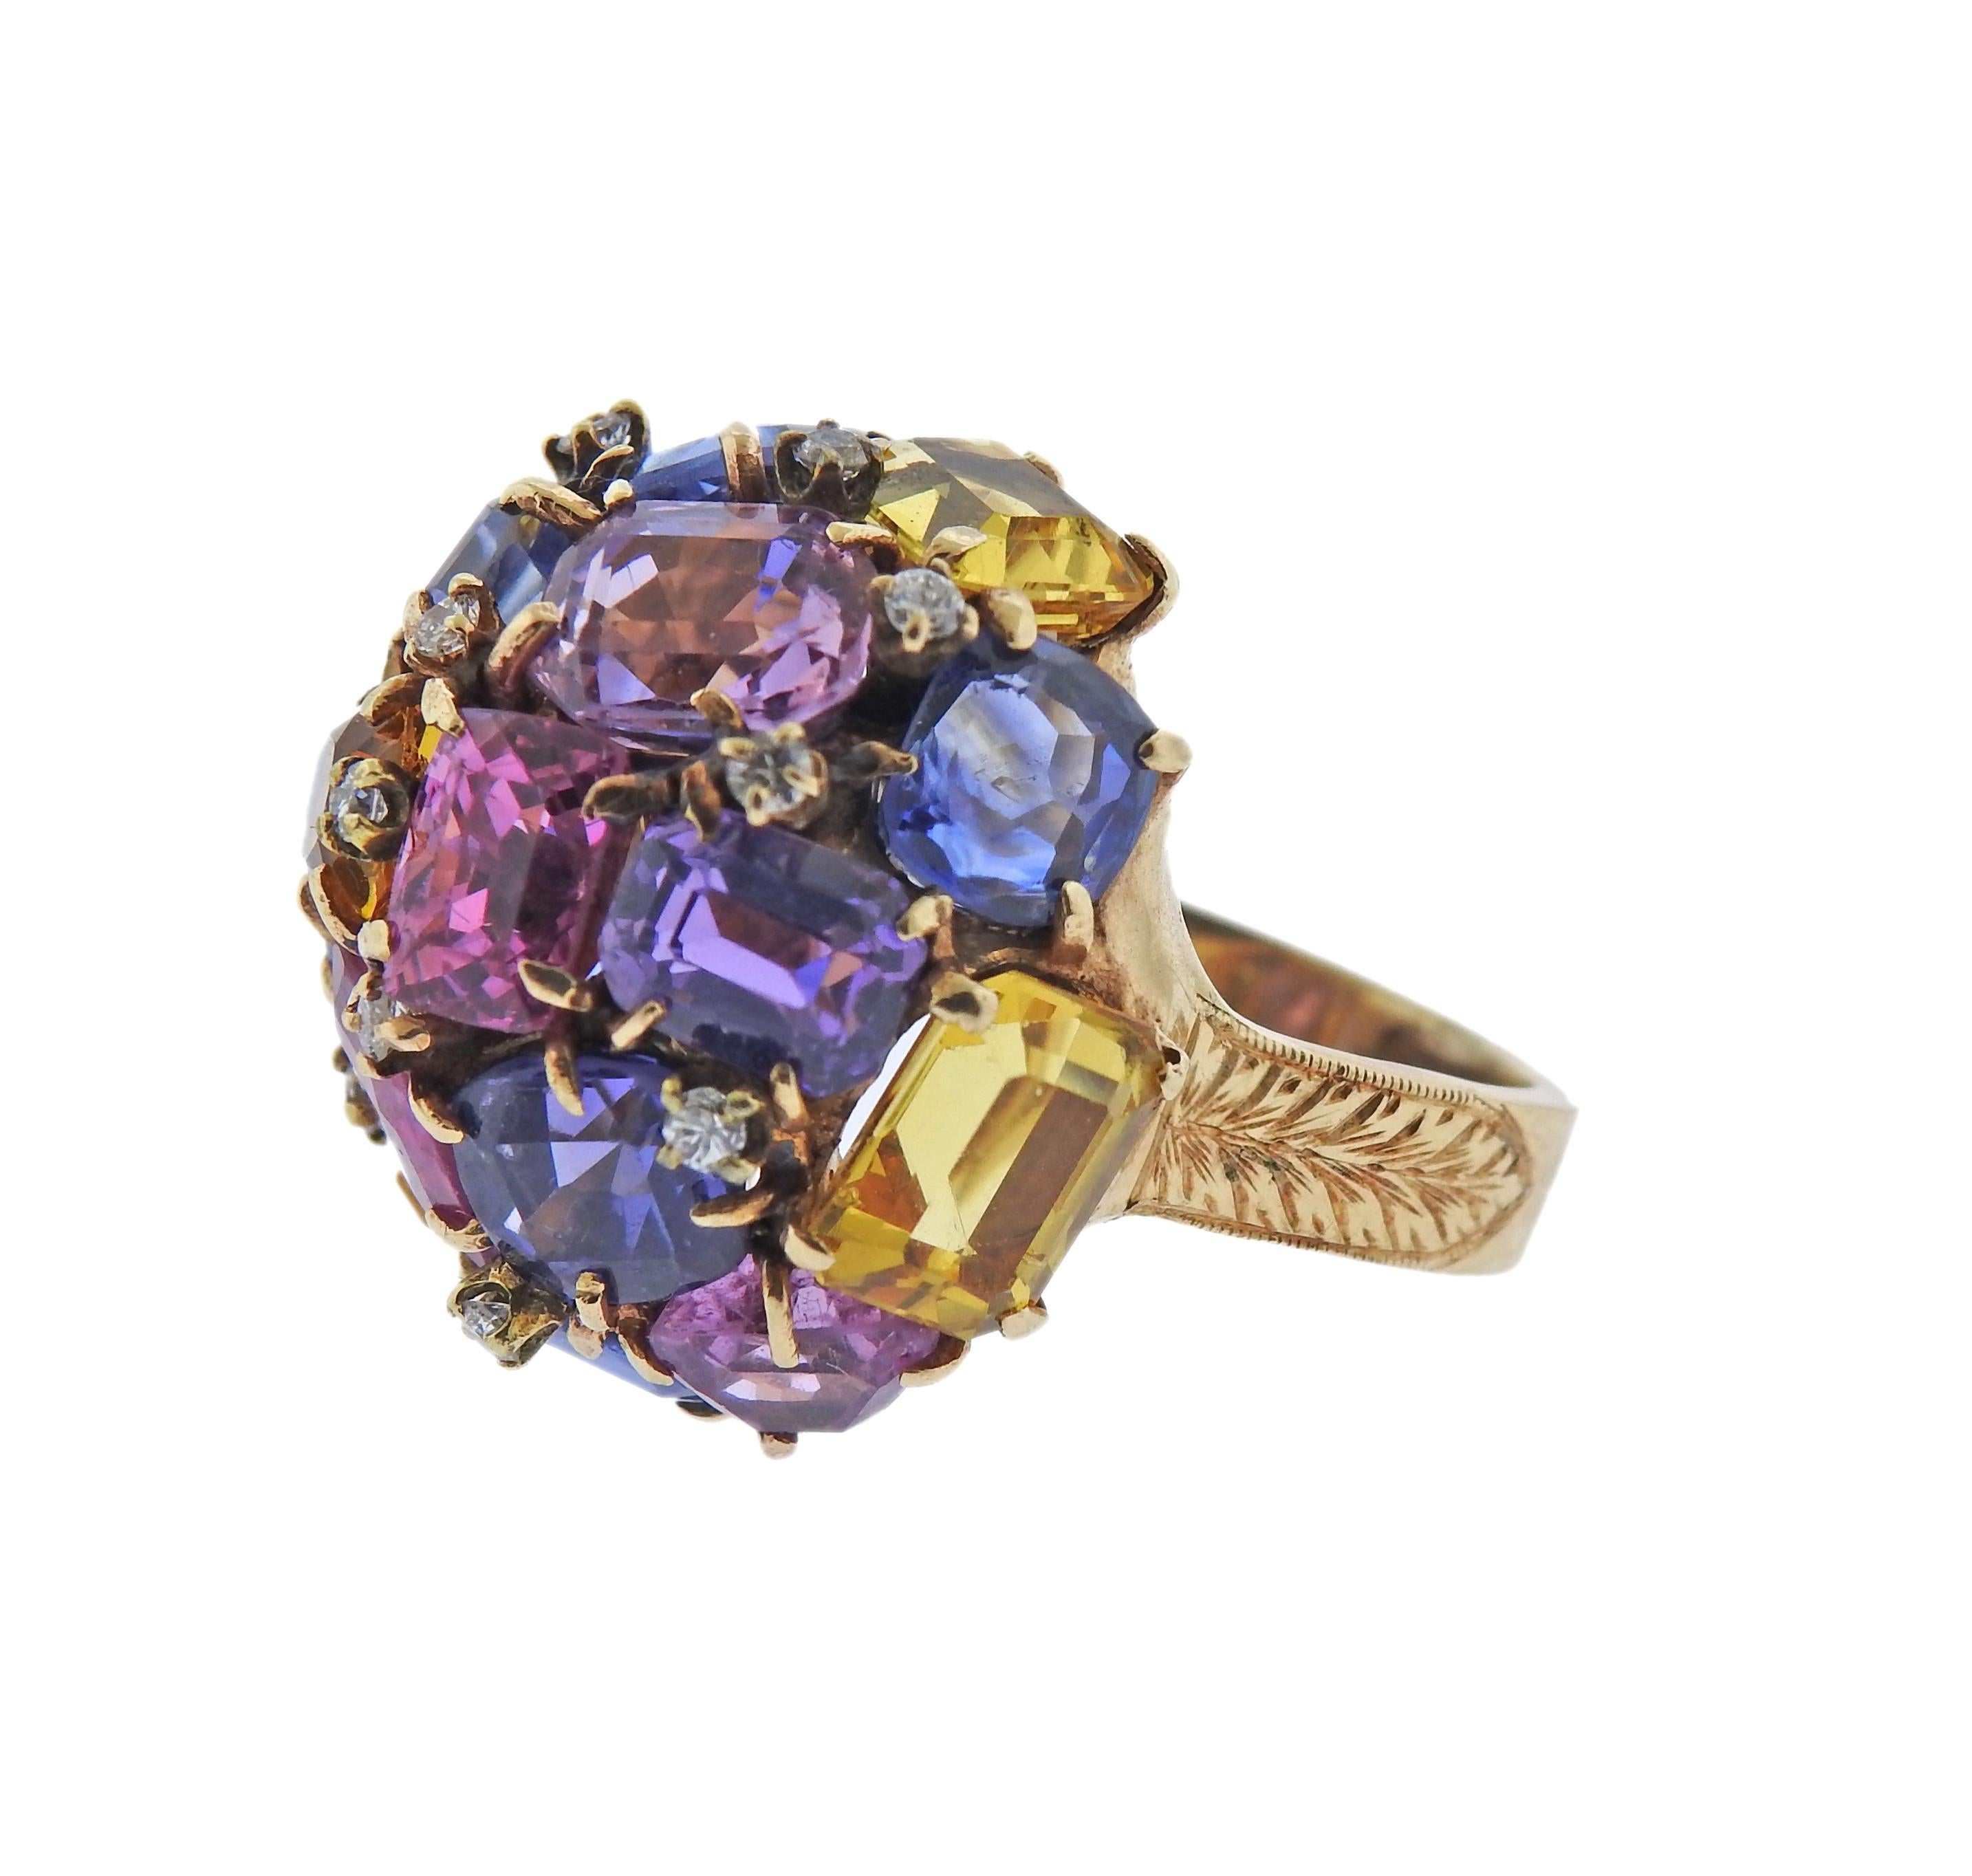 14k gold dome ring, with multi color sapphires, citrine and amethyst, and approx. 0.12ctw in diamonds. Ring size - 6.5, ring top - 23mm x 22mm. Marked: 14k. Weight - 17.1 grams.